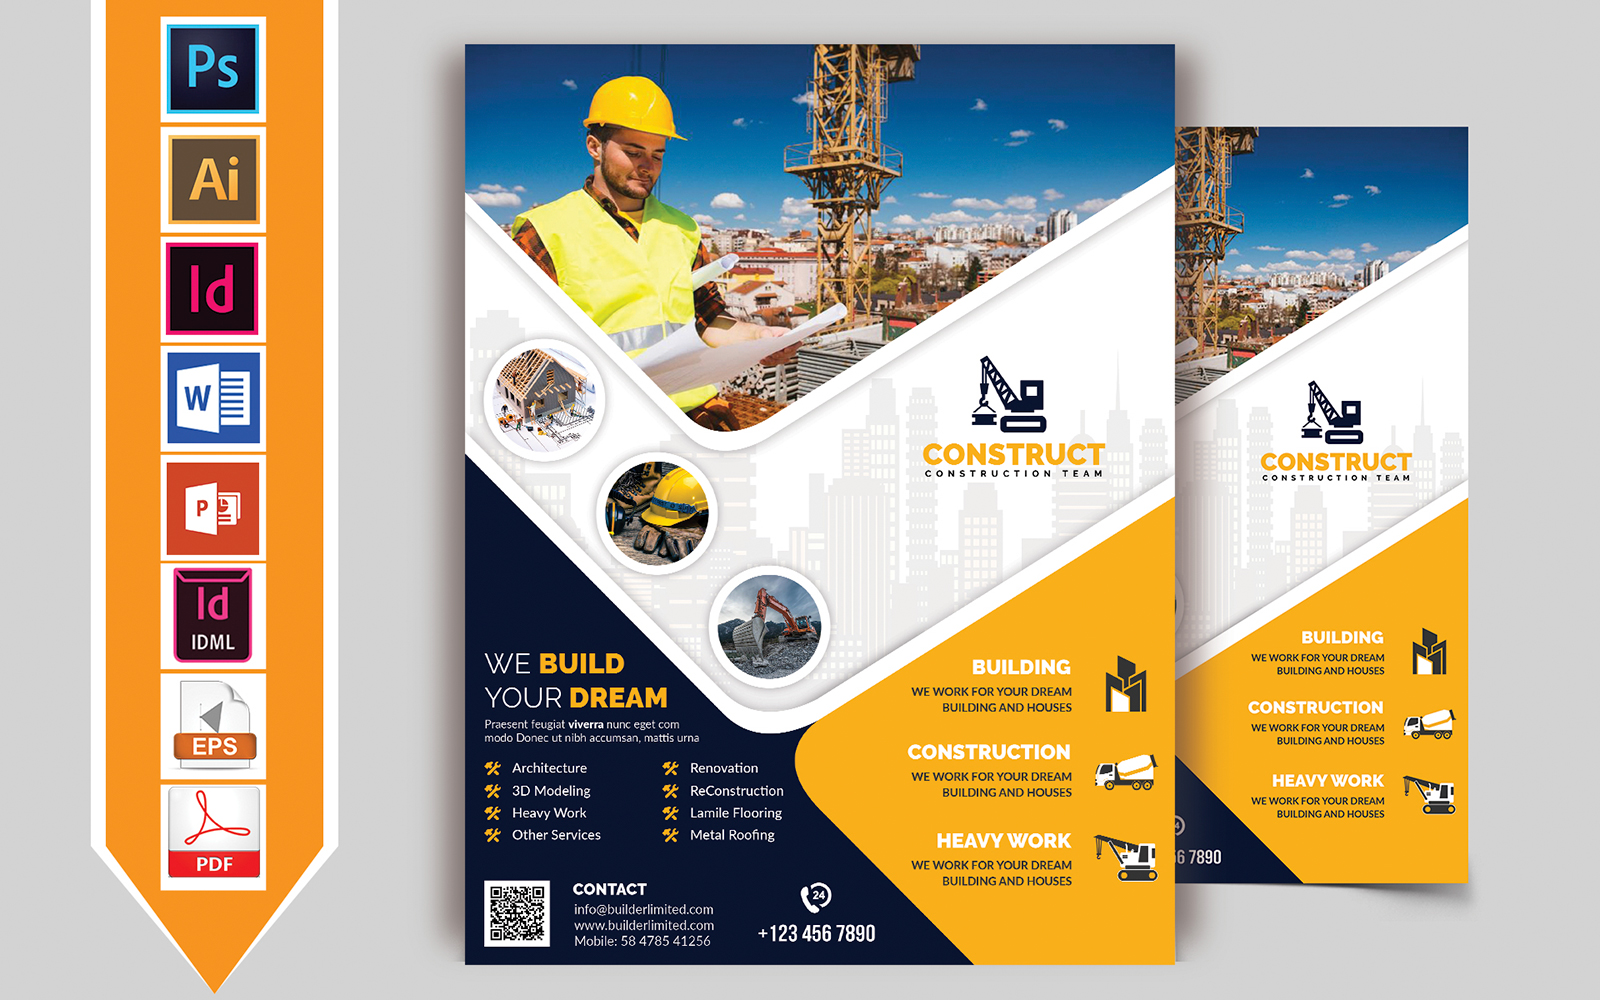 Construction Flyer Vol-09 - Corporate Identity Template